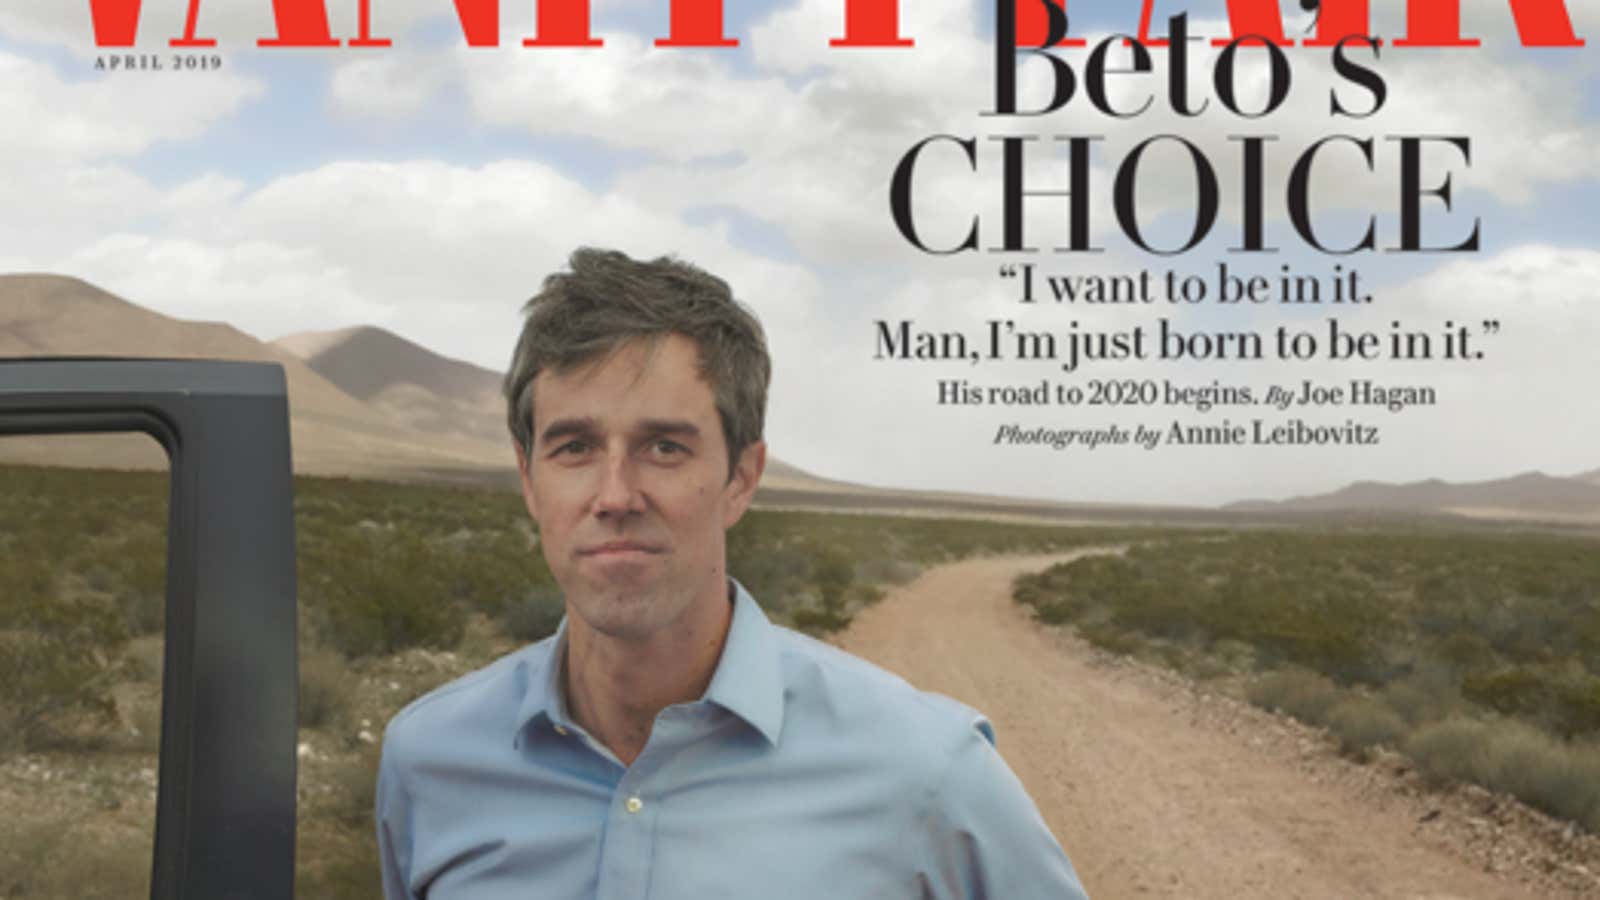 What Annie Leibovitz’s slick, boring Beto photoshoot tells us about the candidate